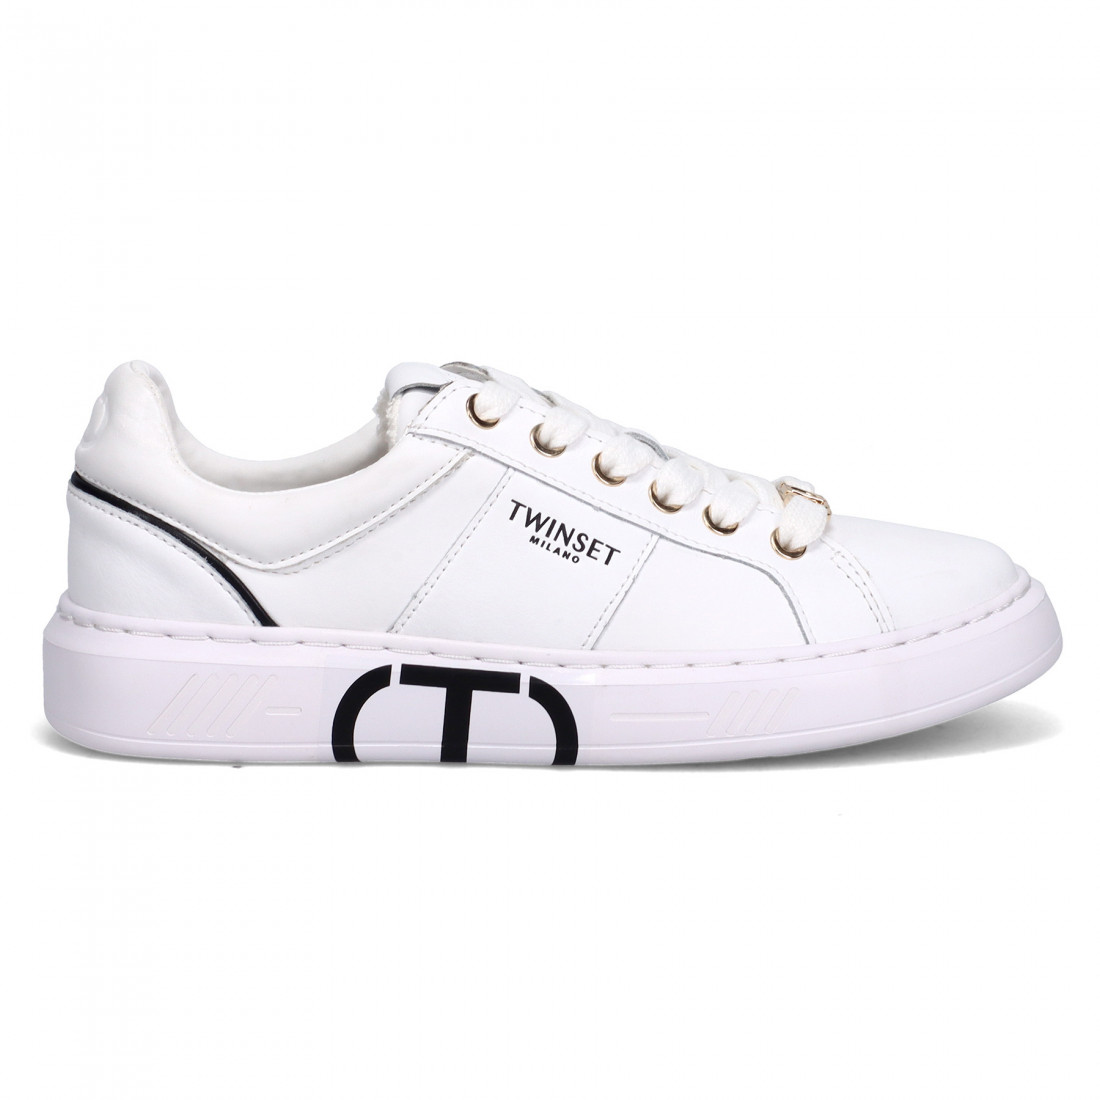 Black and Twinset sneakers Oval T logo